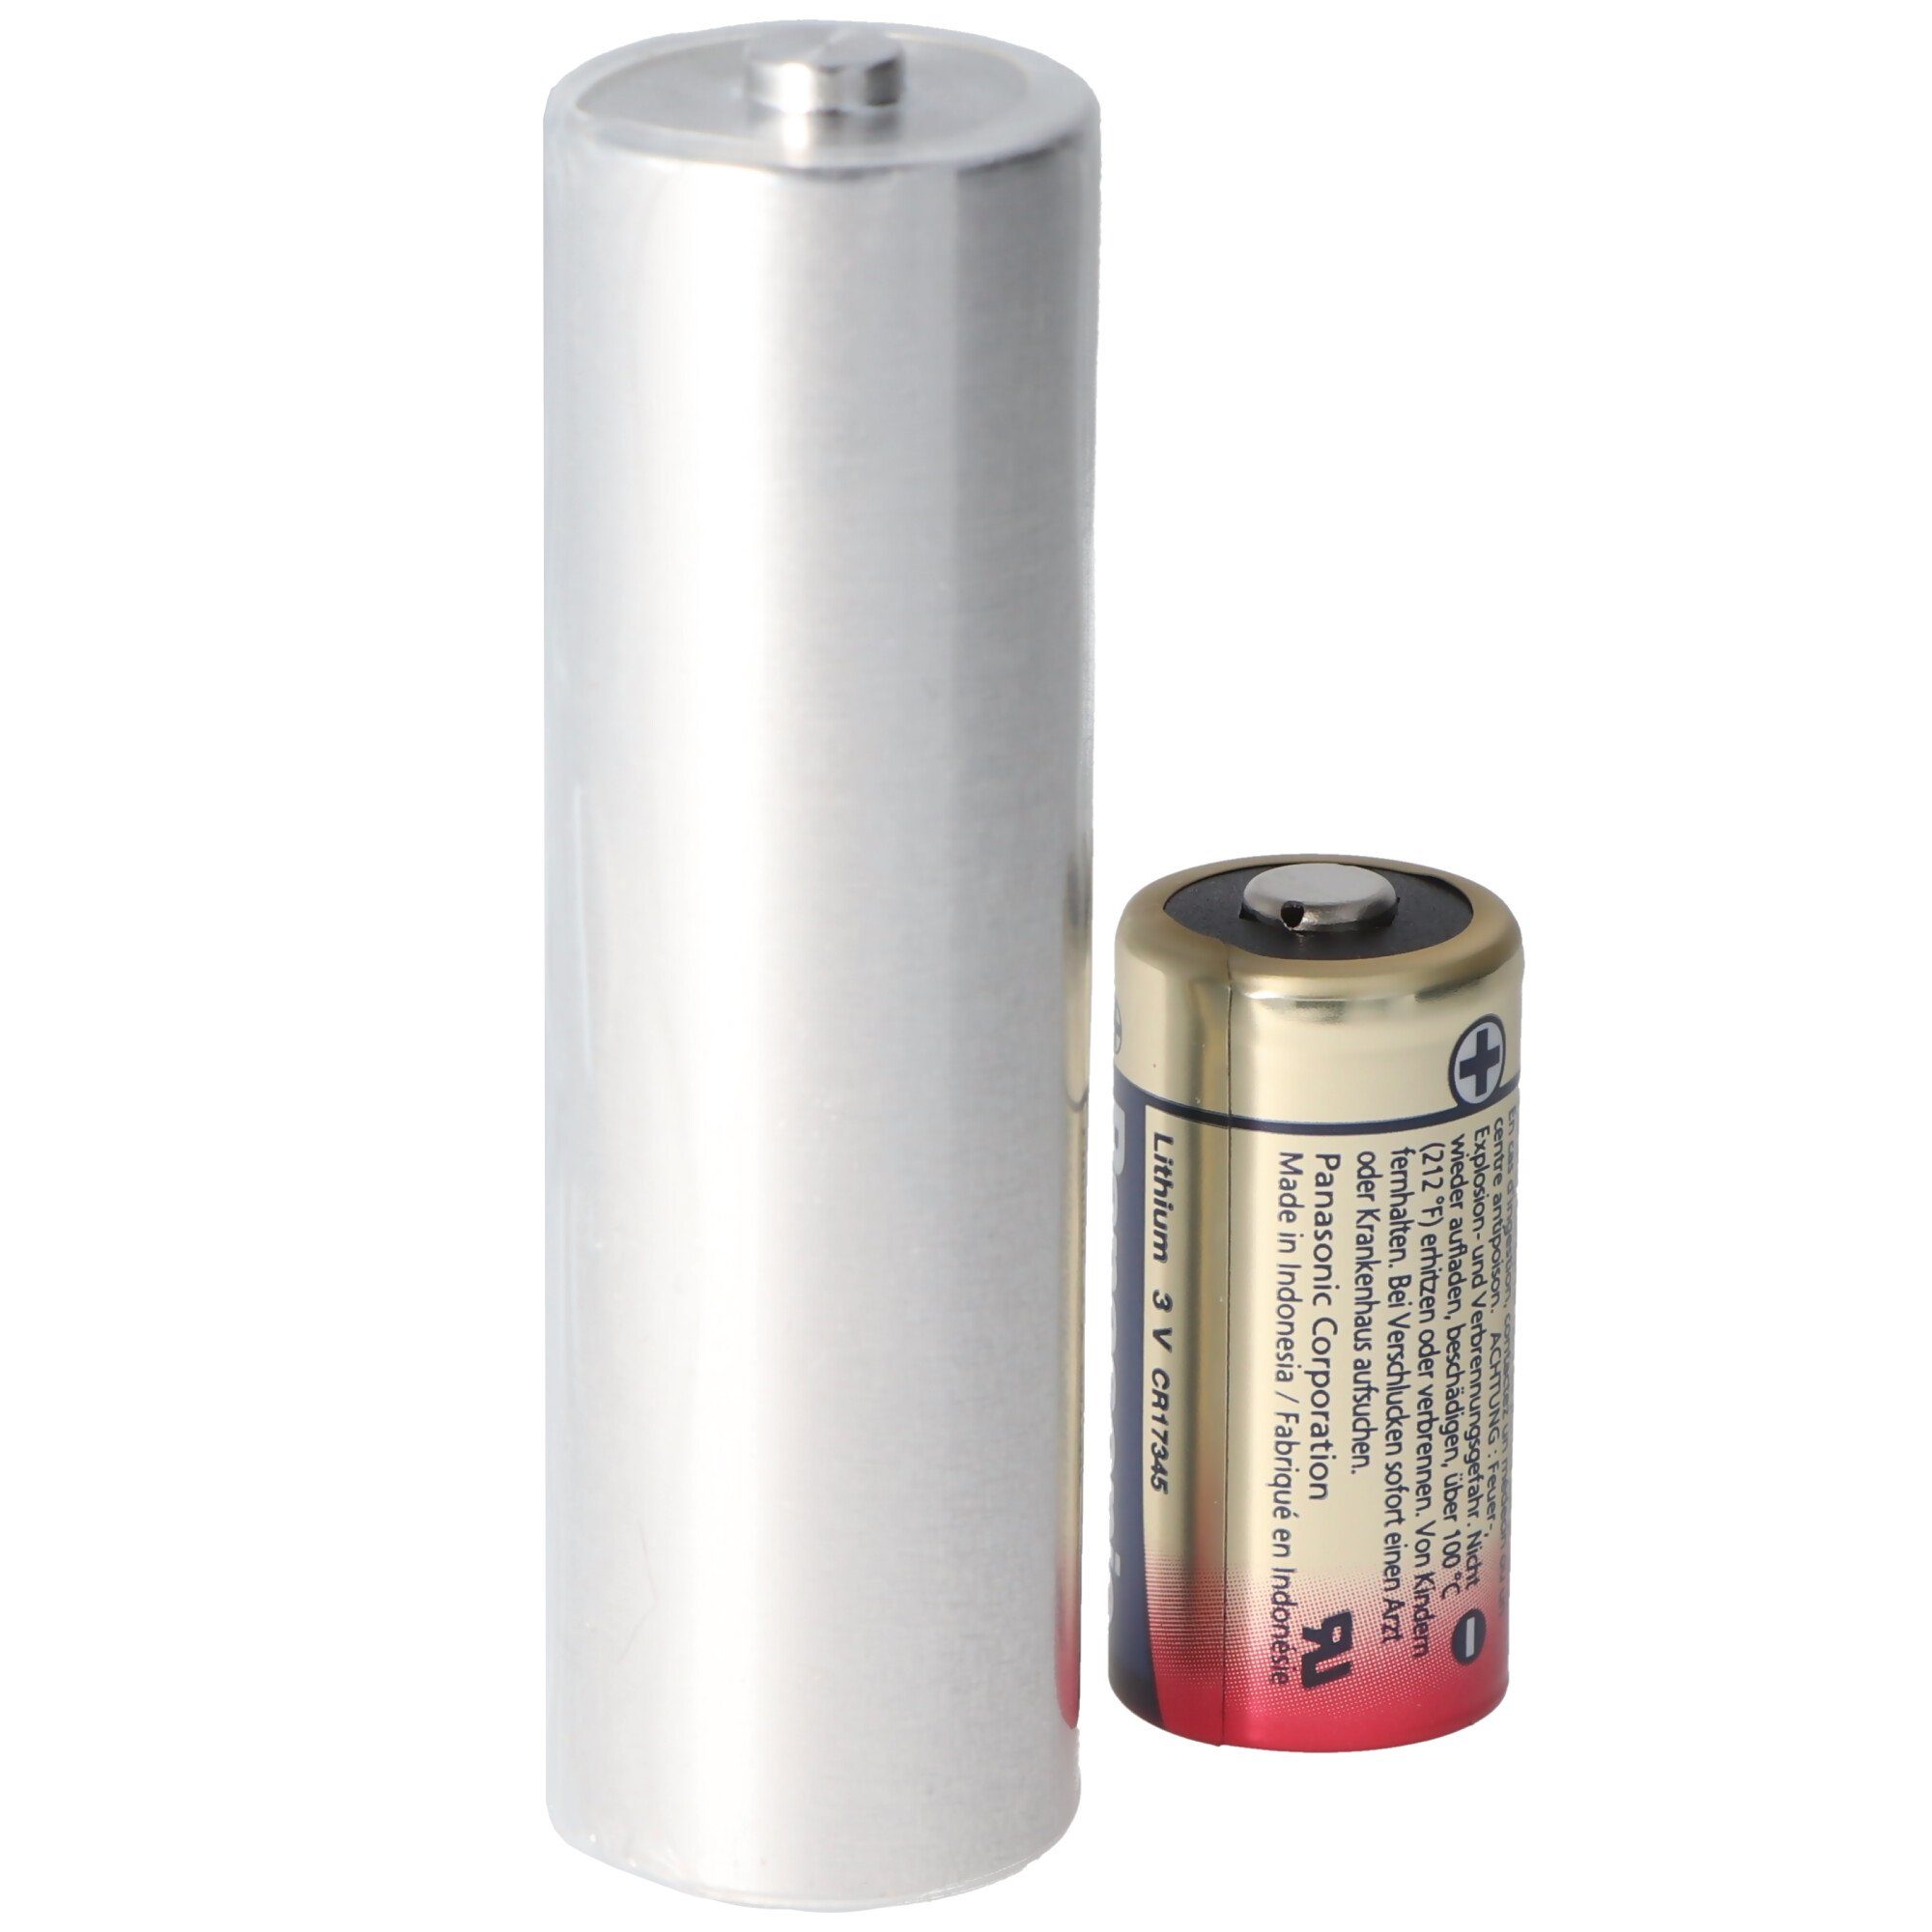 AccuCell Adapter 2R10 Vo Batterie 2R10R, 3010, Batterie 2010, Duplex Stab-Batterie, 3,0